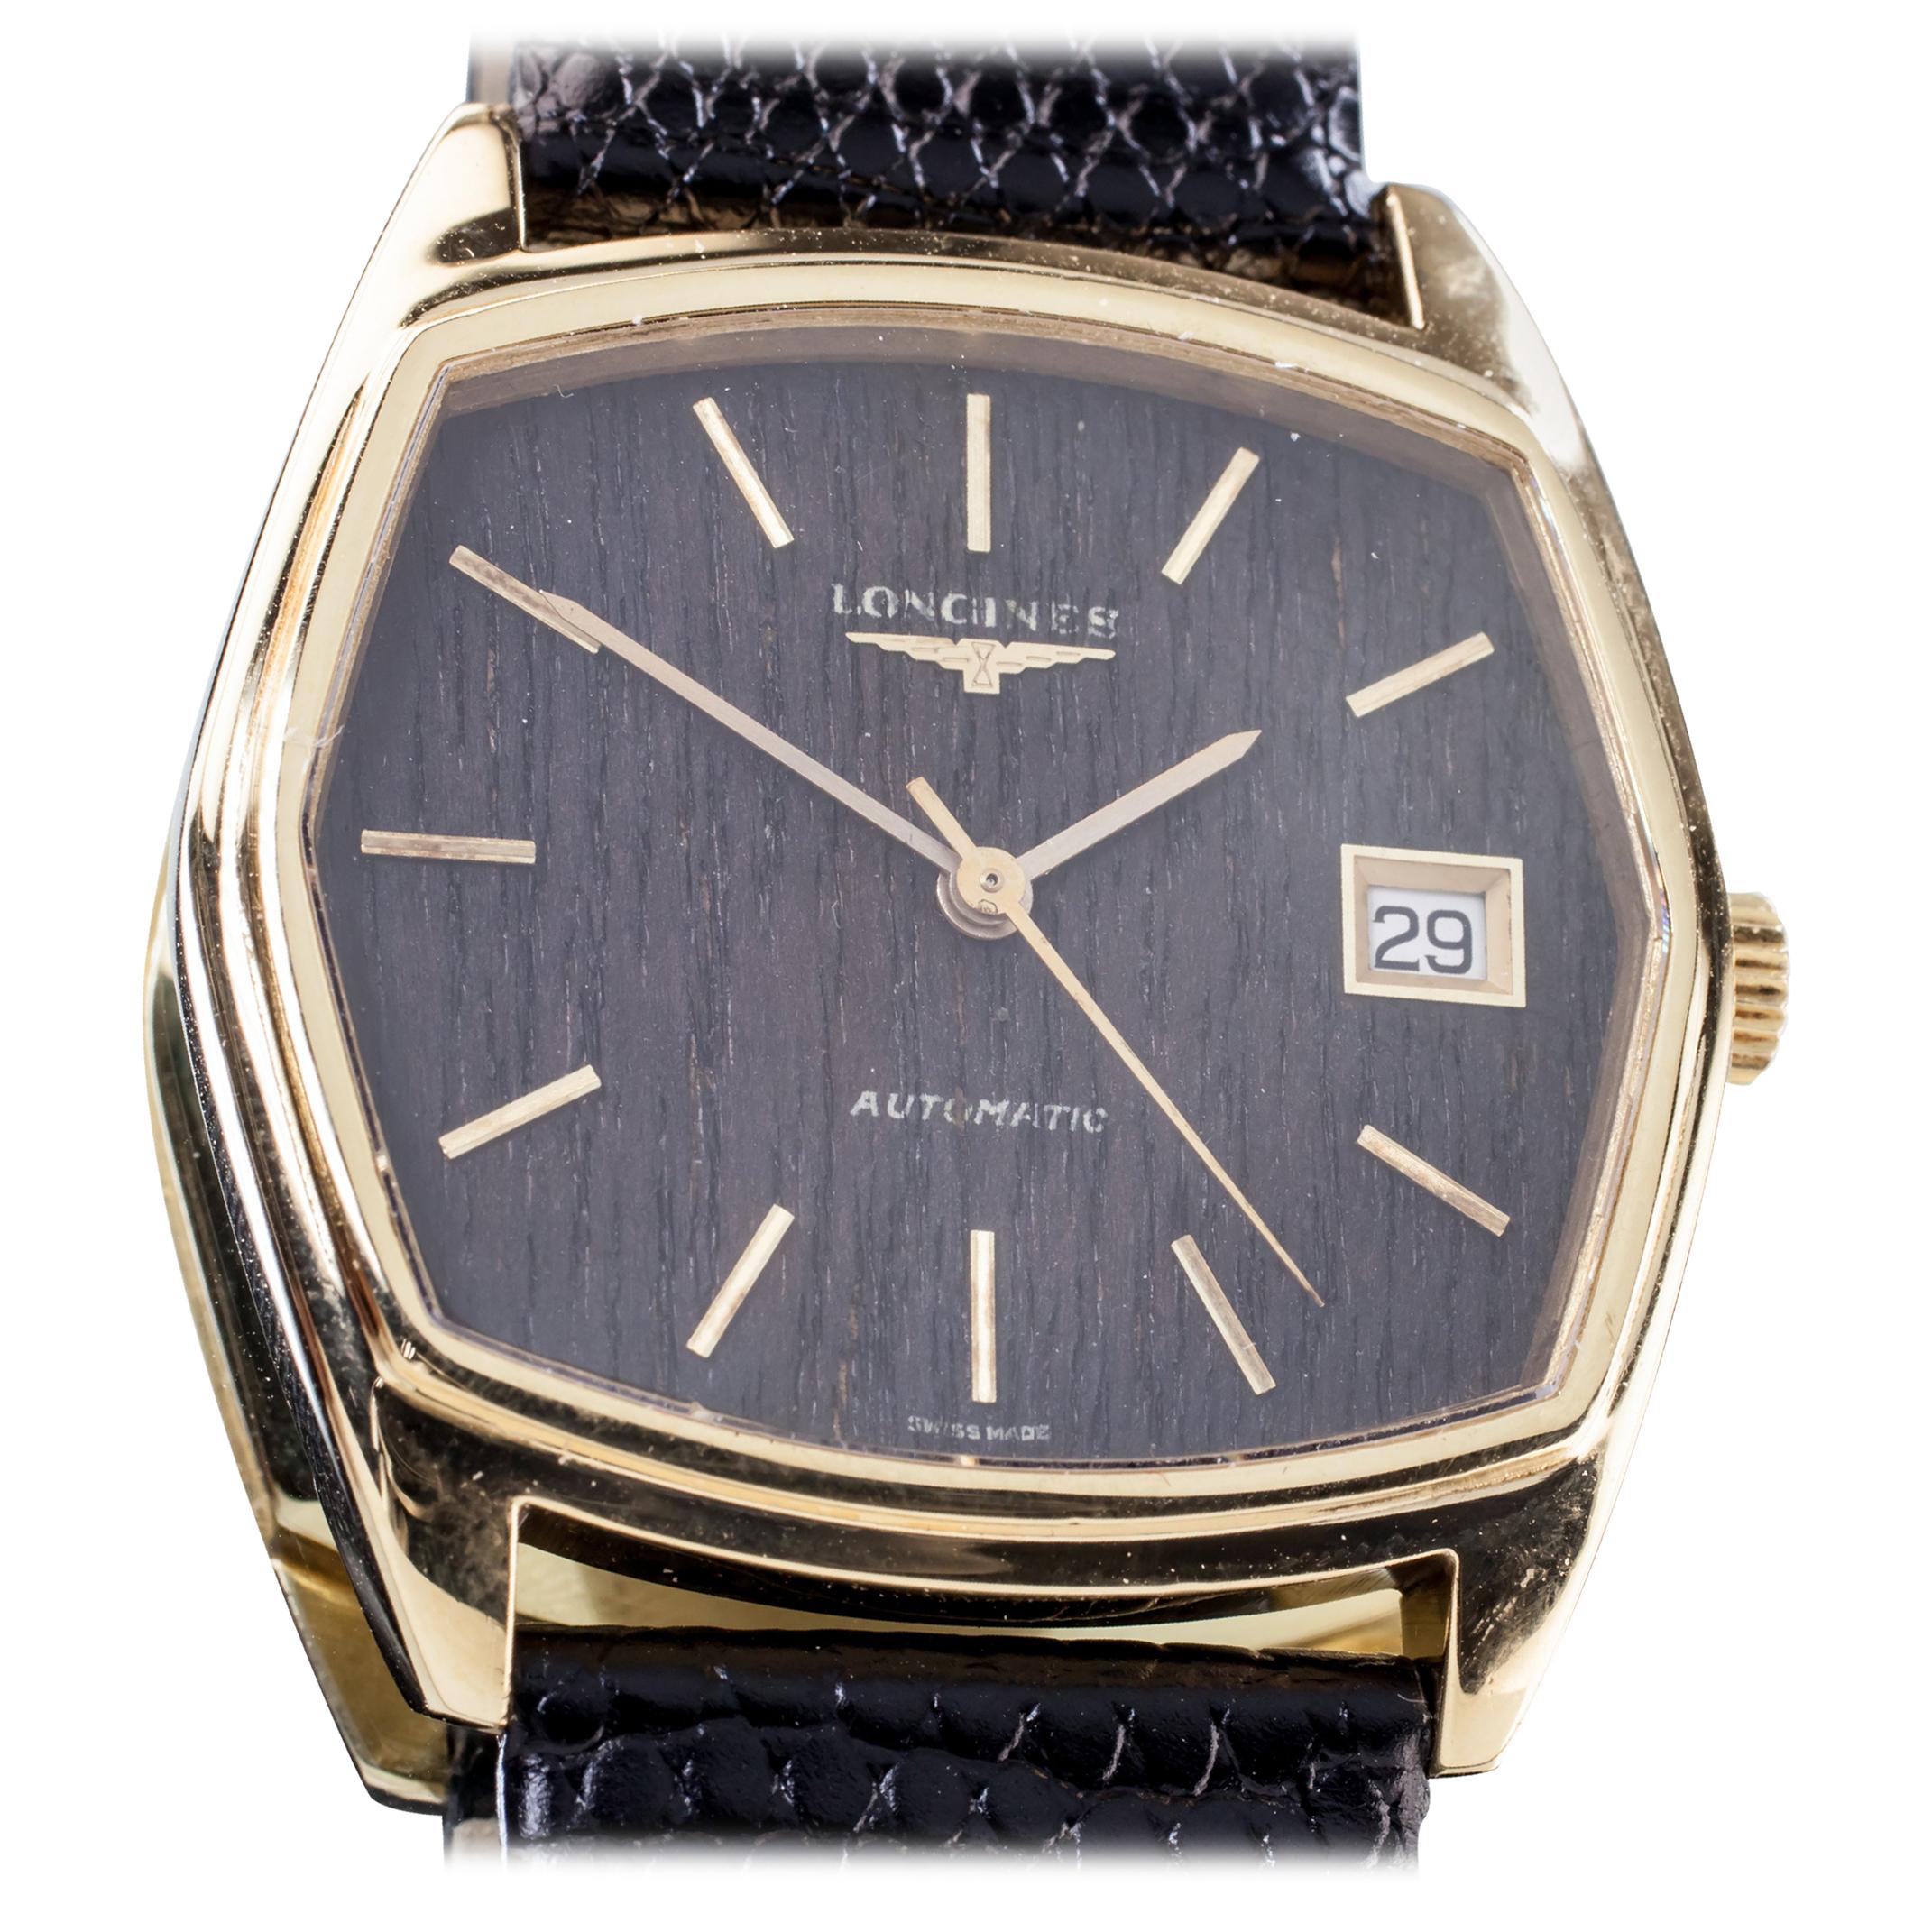 18 Karat Gold Longines Men's Automatic Watch with Wood Dial and Leather Band